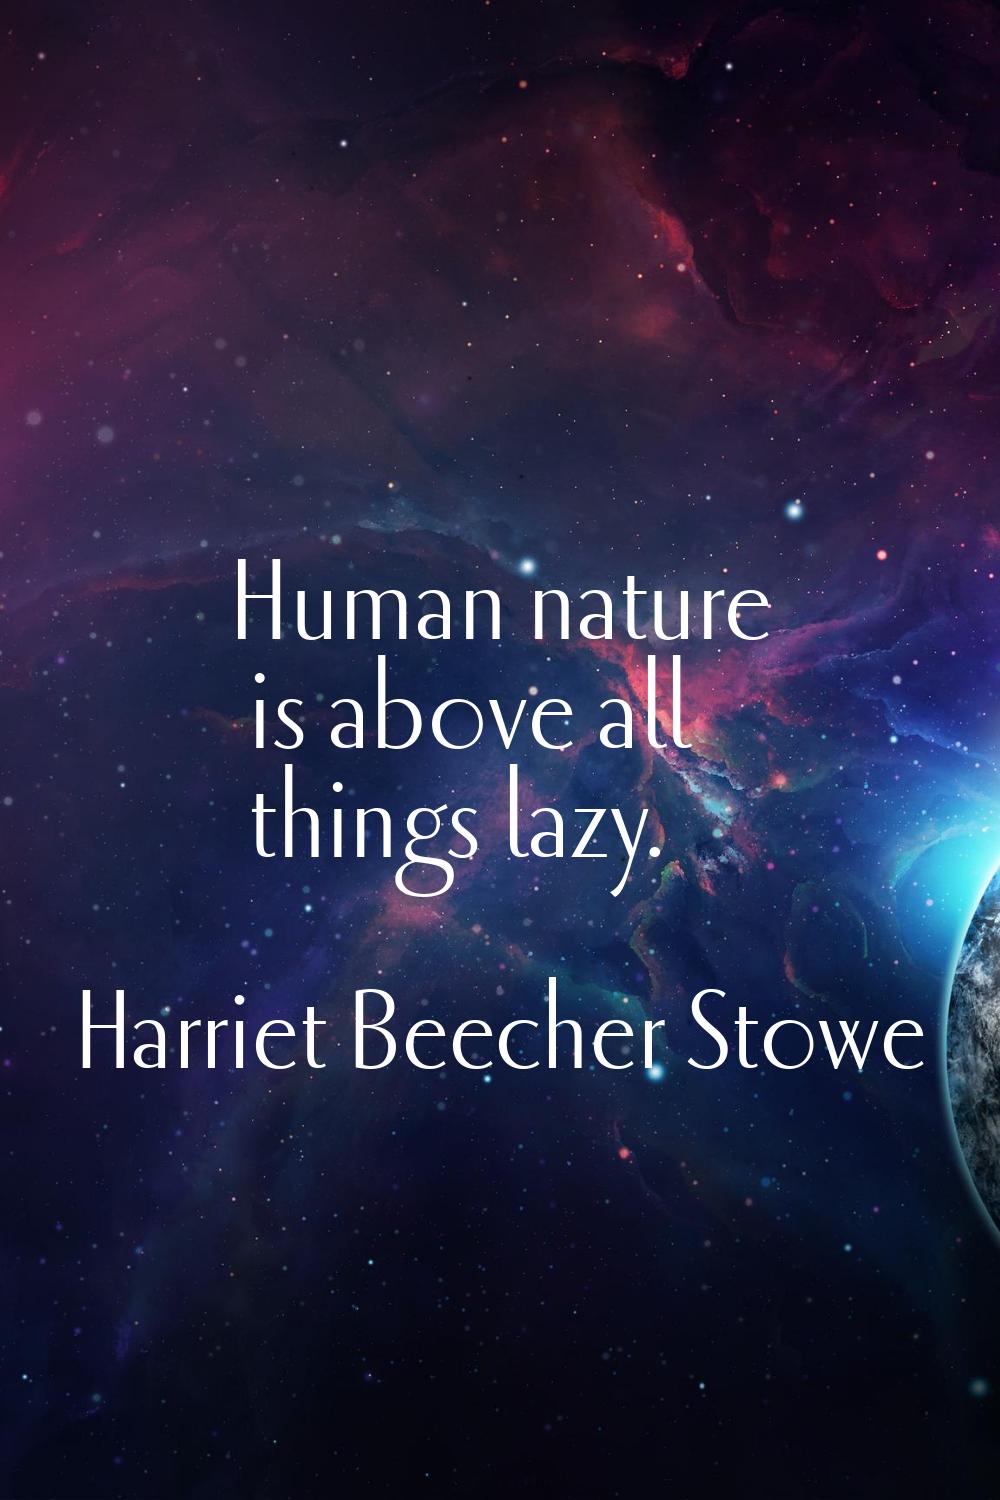 Human nature is above all things lazy.